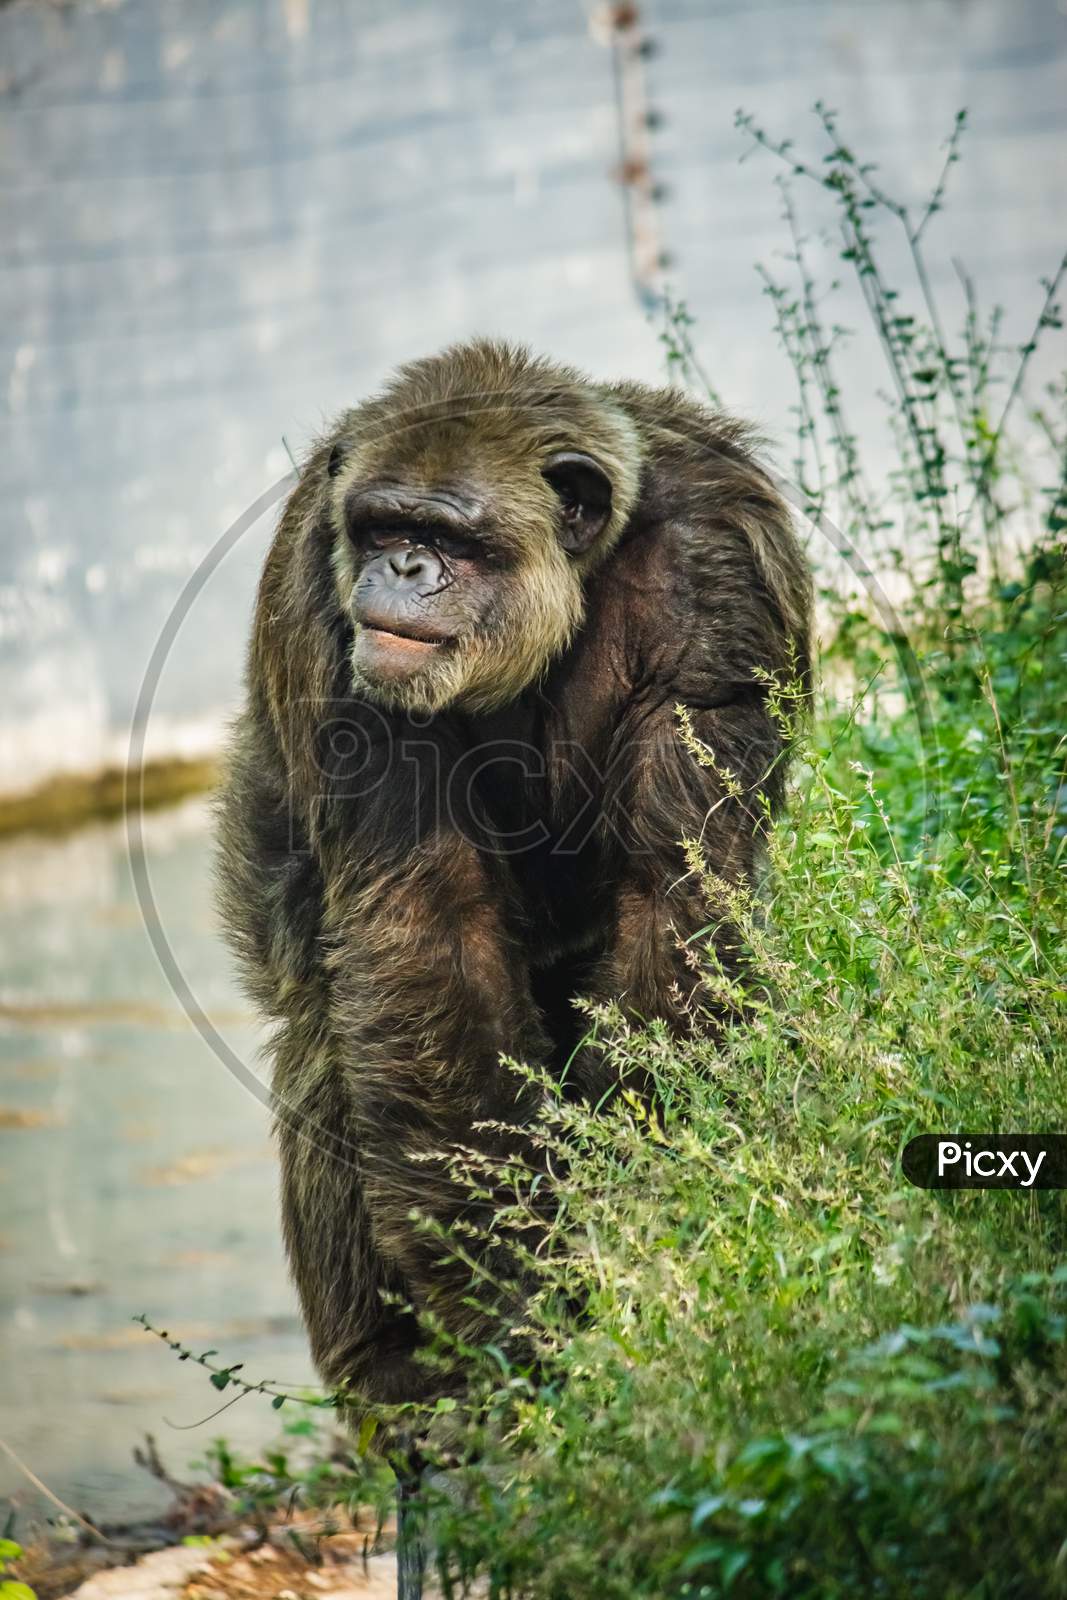 Young Gigantic Male Chimpanzee Standing On Near Water Pond And Looking At The Camera. Chimpanzee In Close Up View With Thoughtful Expression. Monkey & Apes Family